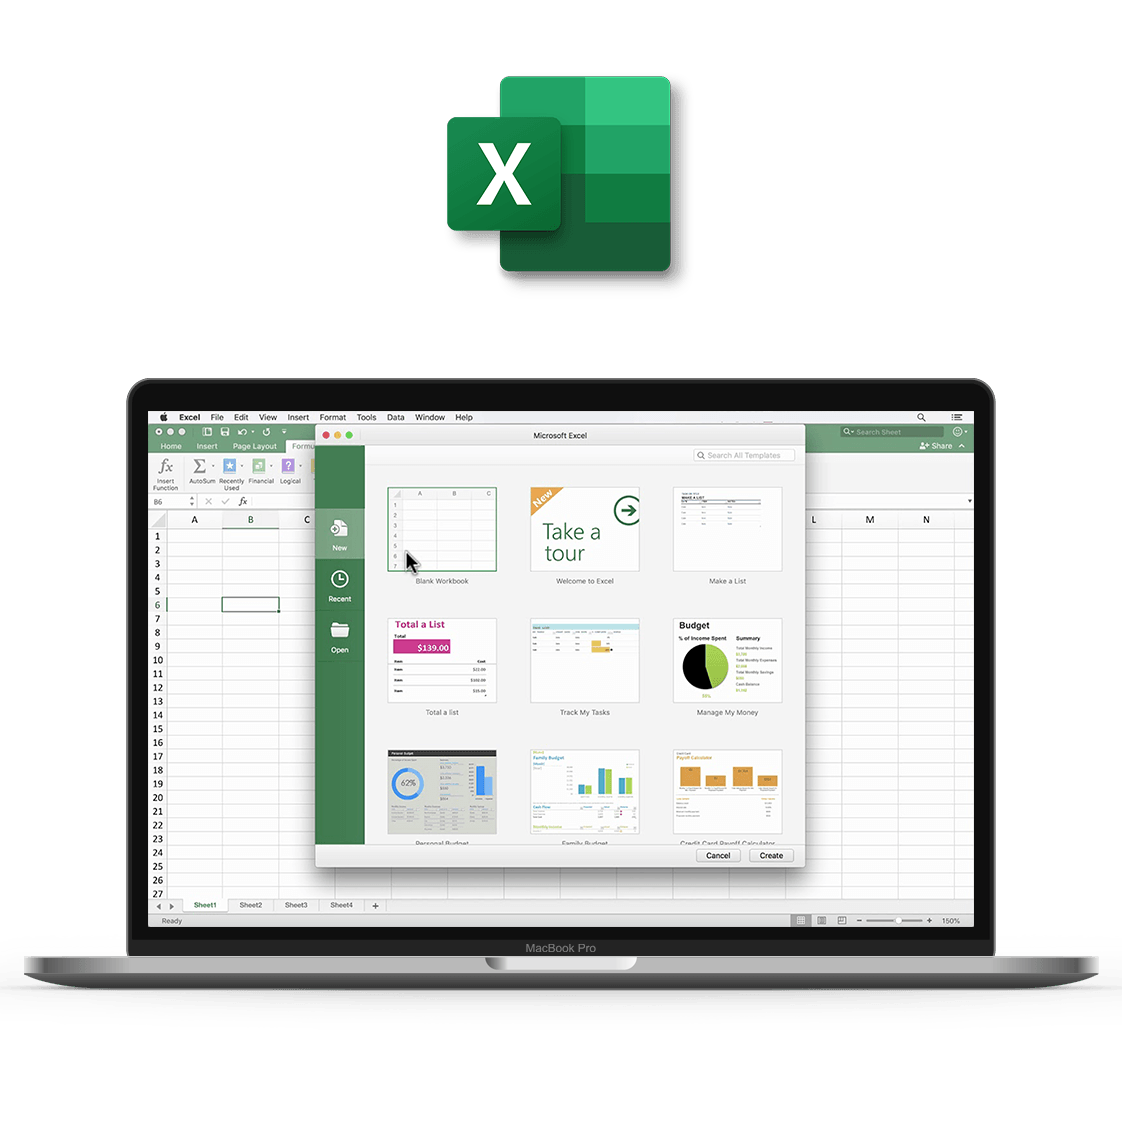 microsoft office home and business 2019 for mac os